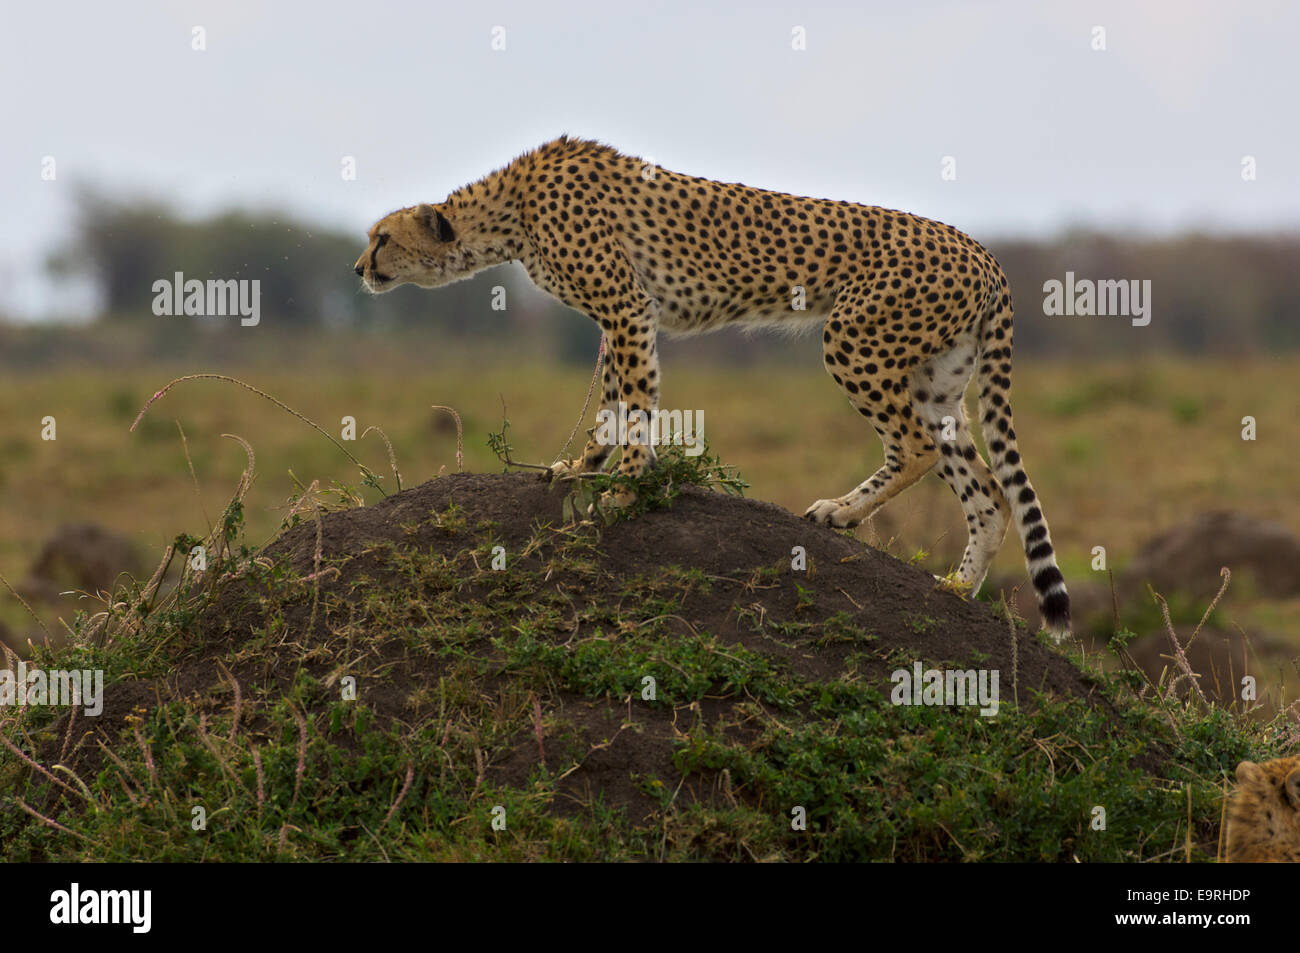 A cheetah in its prime, having identified a potential prey from a vantage point, ready to run, all muscles in tension. Stock Photo